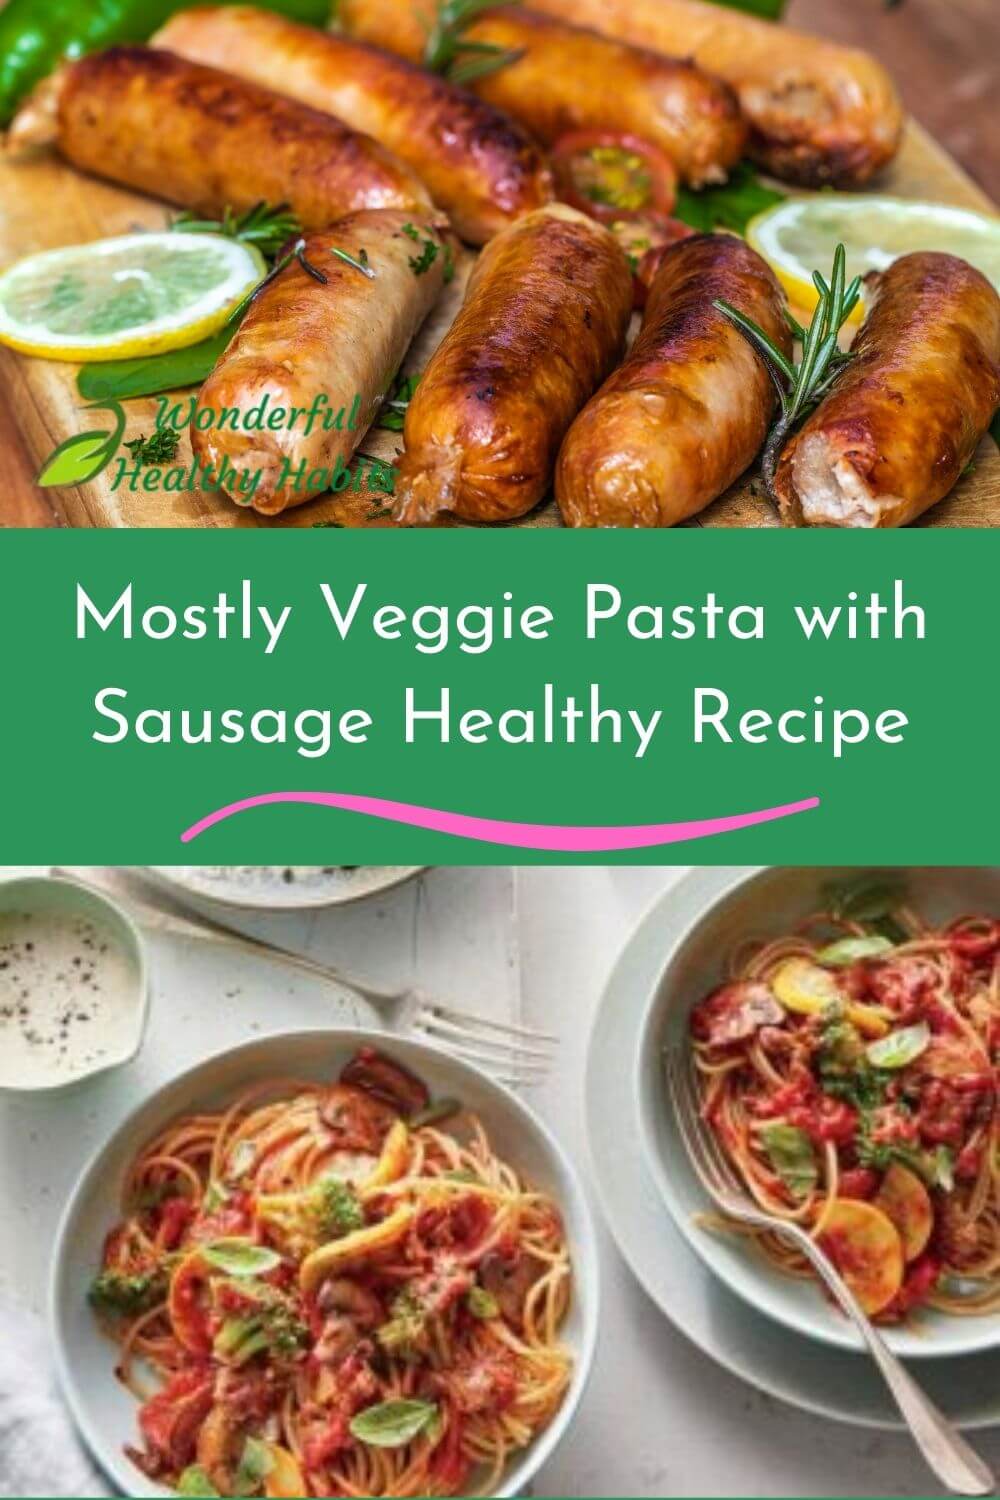 Mostly Veggie Pasta with Sausage Healthy Recipe